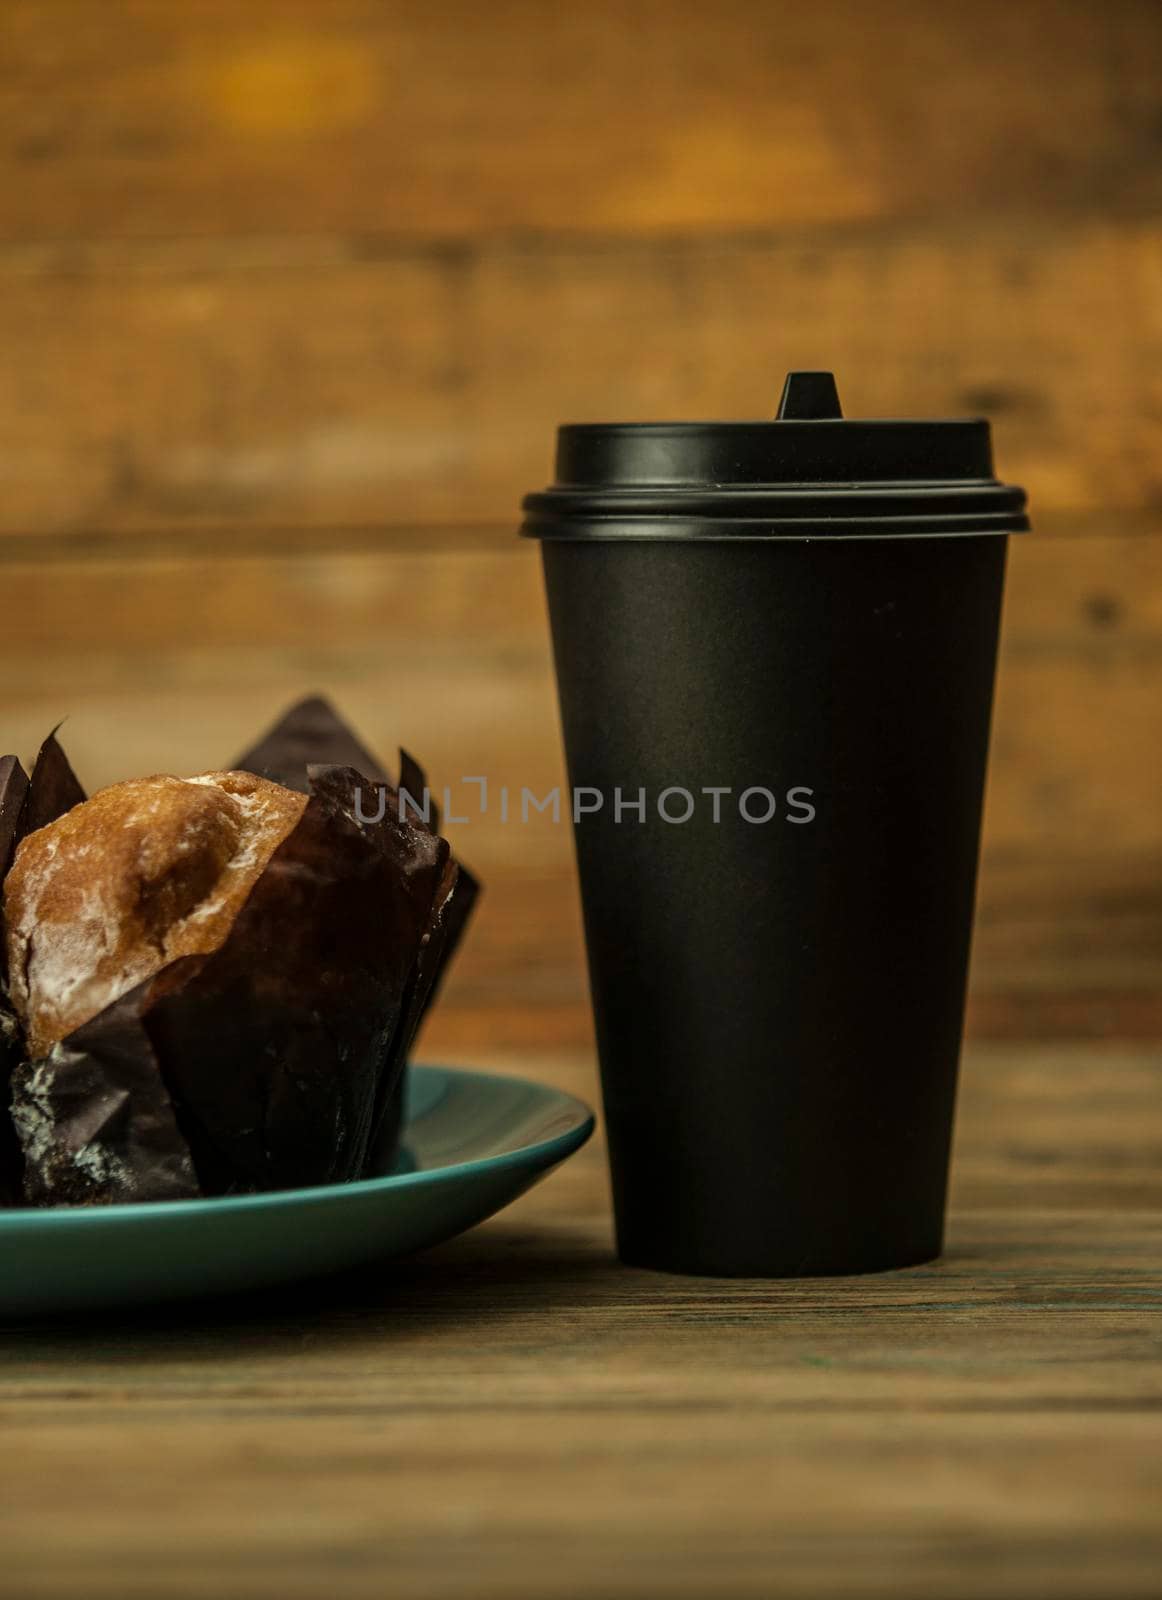 Homemade chocolate and vanilla cupcakes with paper disposable coffee cup on a wooden table, sprinkled with powdered sugar. Breakfast by inxti